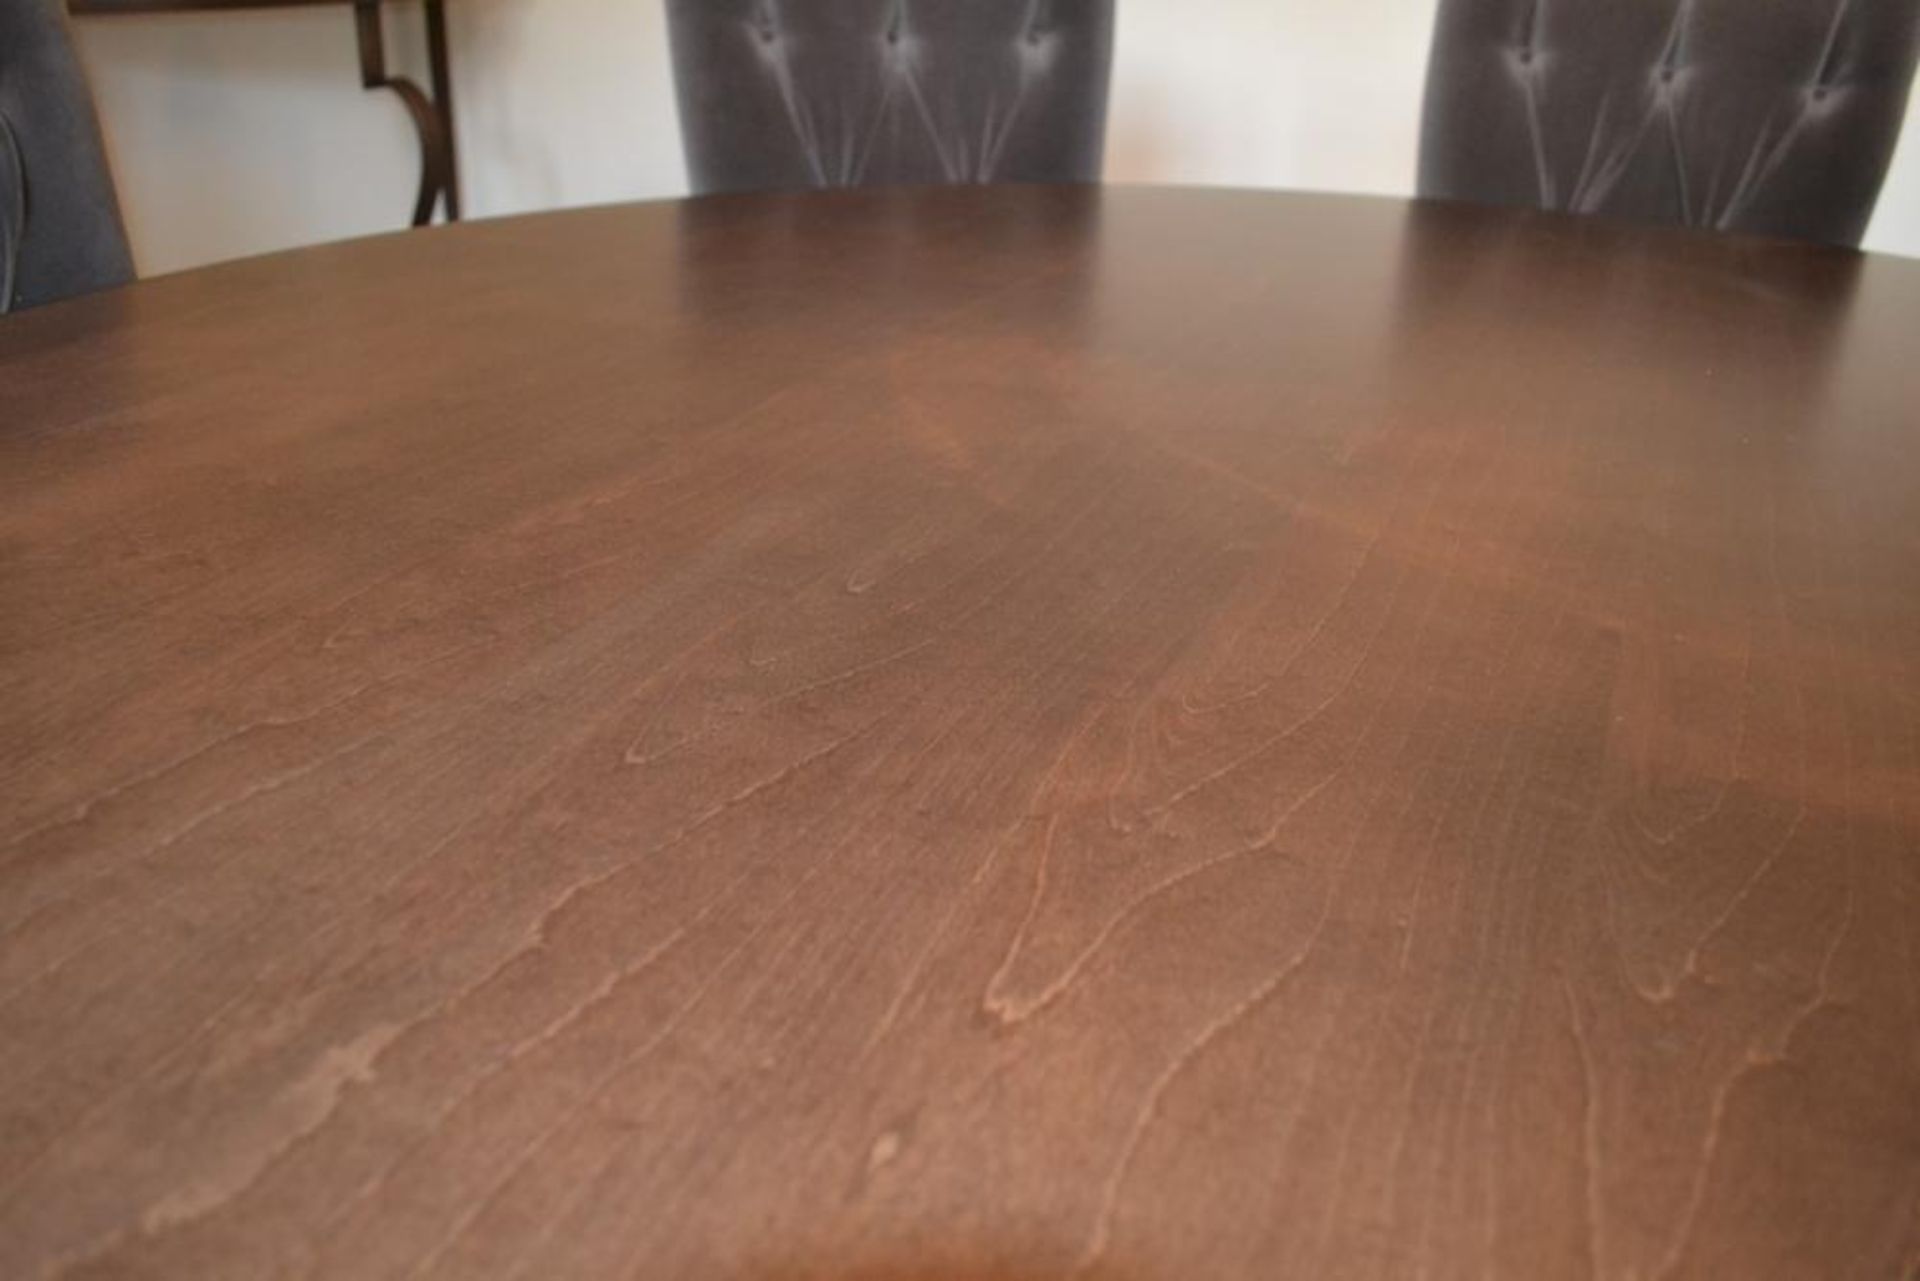 1 x Bespoke Round Dining Table With Sycamore Wood Finish - 1800mm Diameter - Ideal For Family Gather - Image 9 of 14